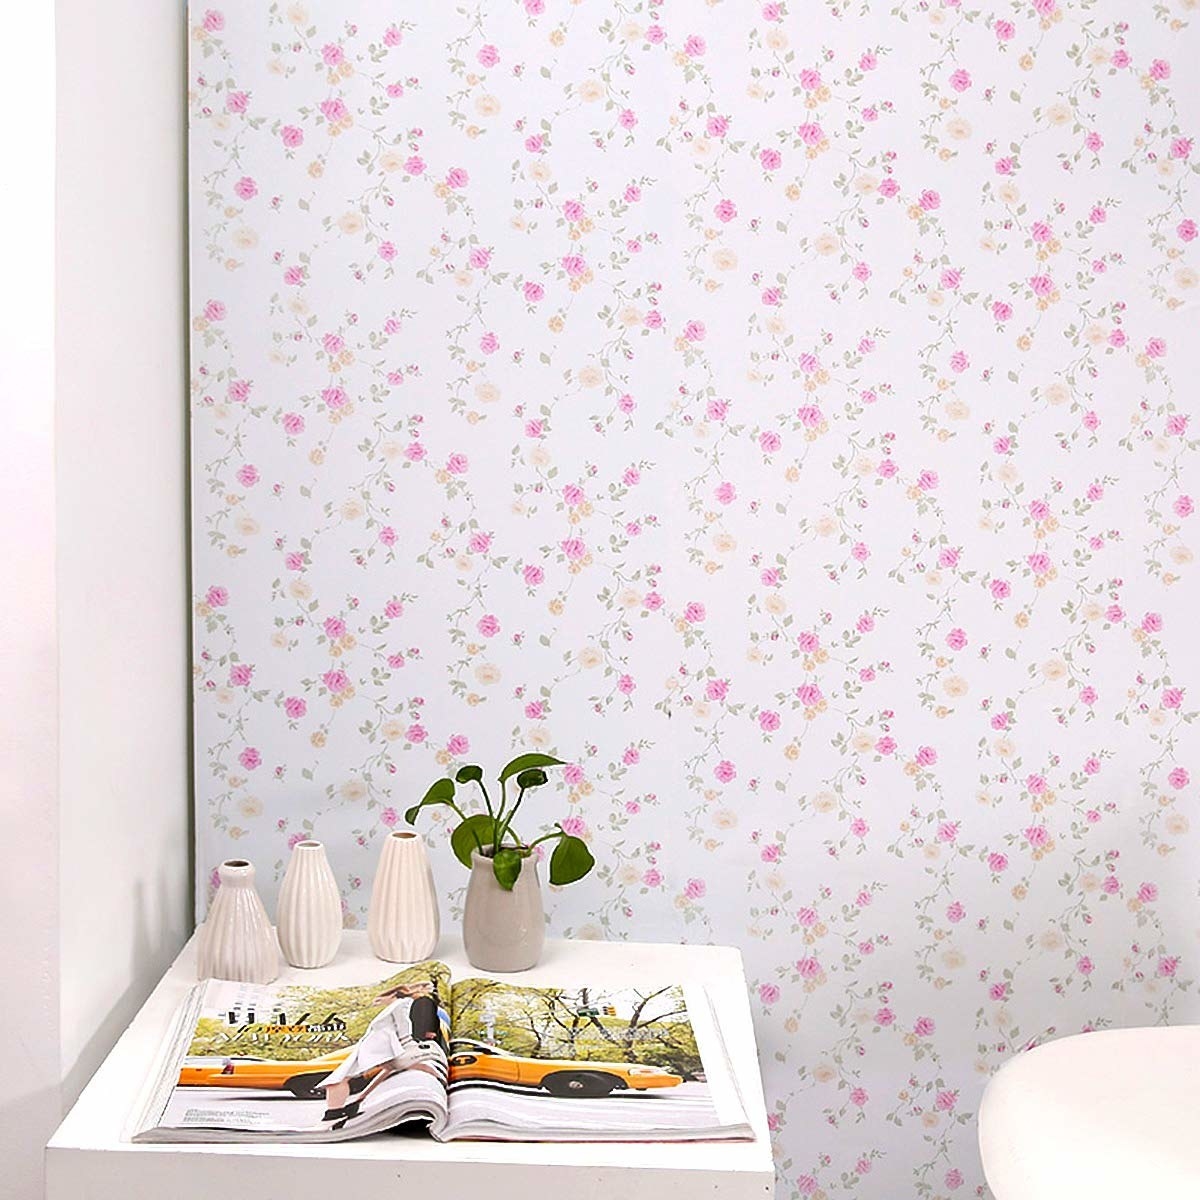 A wallpaper with pink and yellow flowers